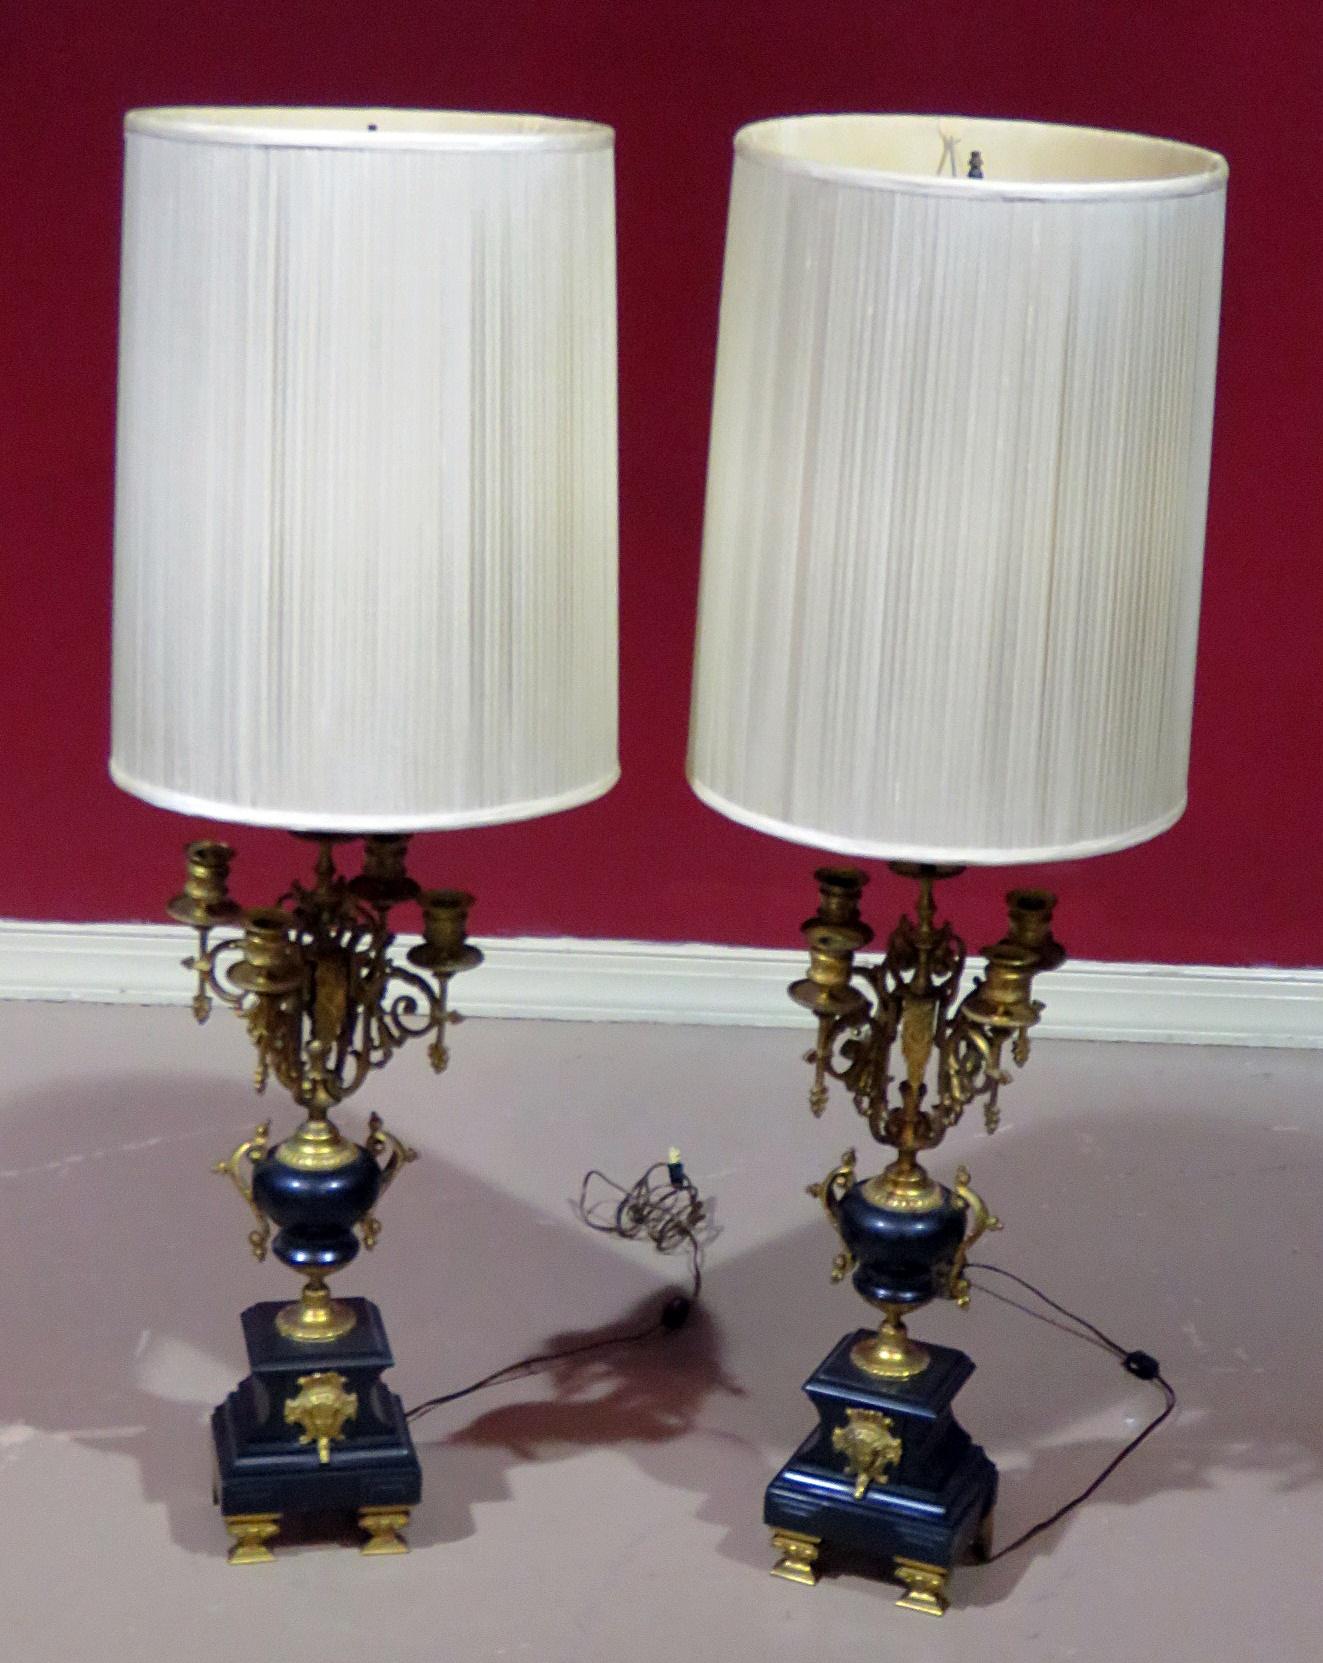 Pair of neoclassical style 4-light candelabra lamps with one standard socket, shade, and brass accents.